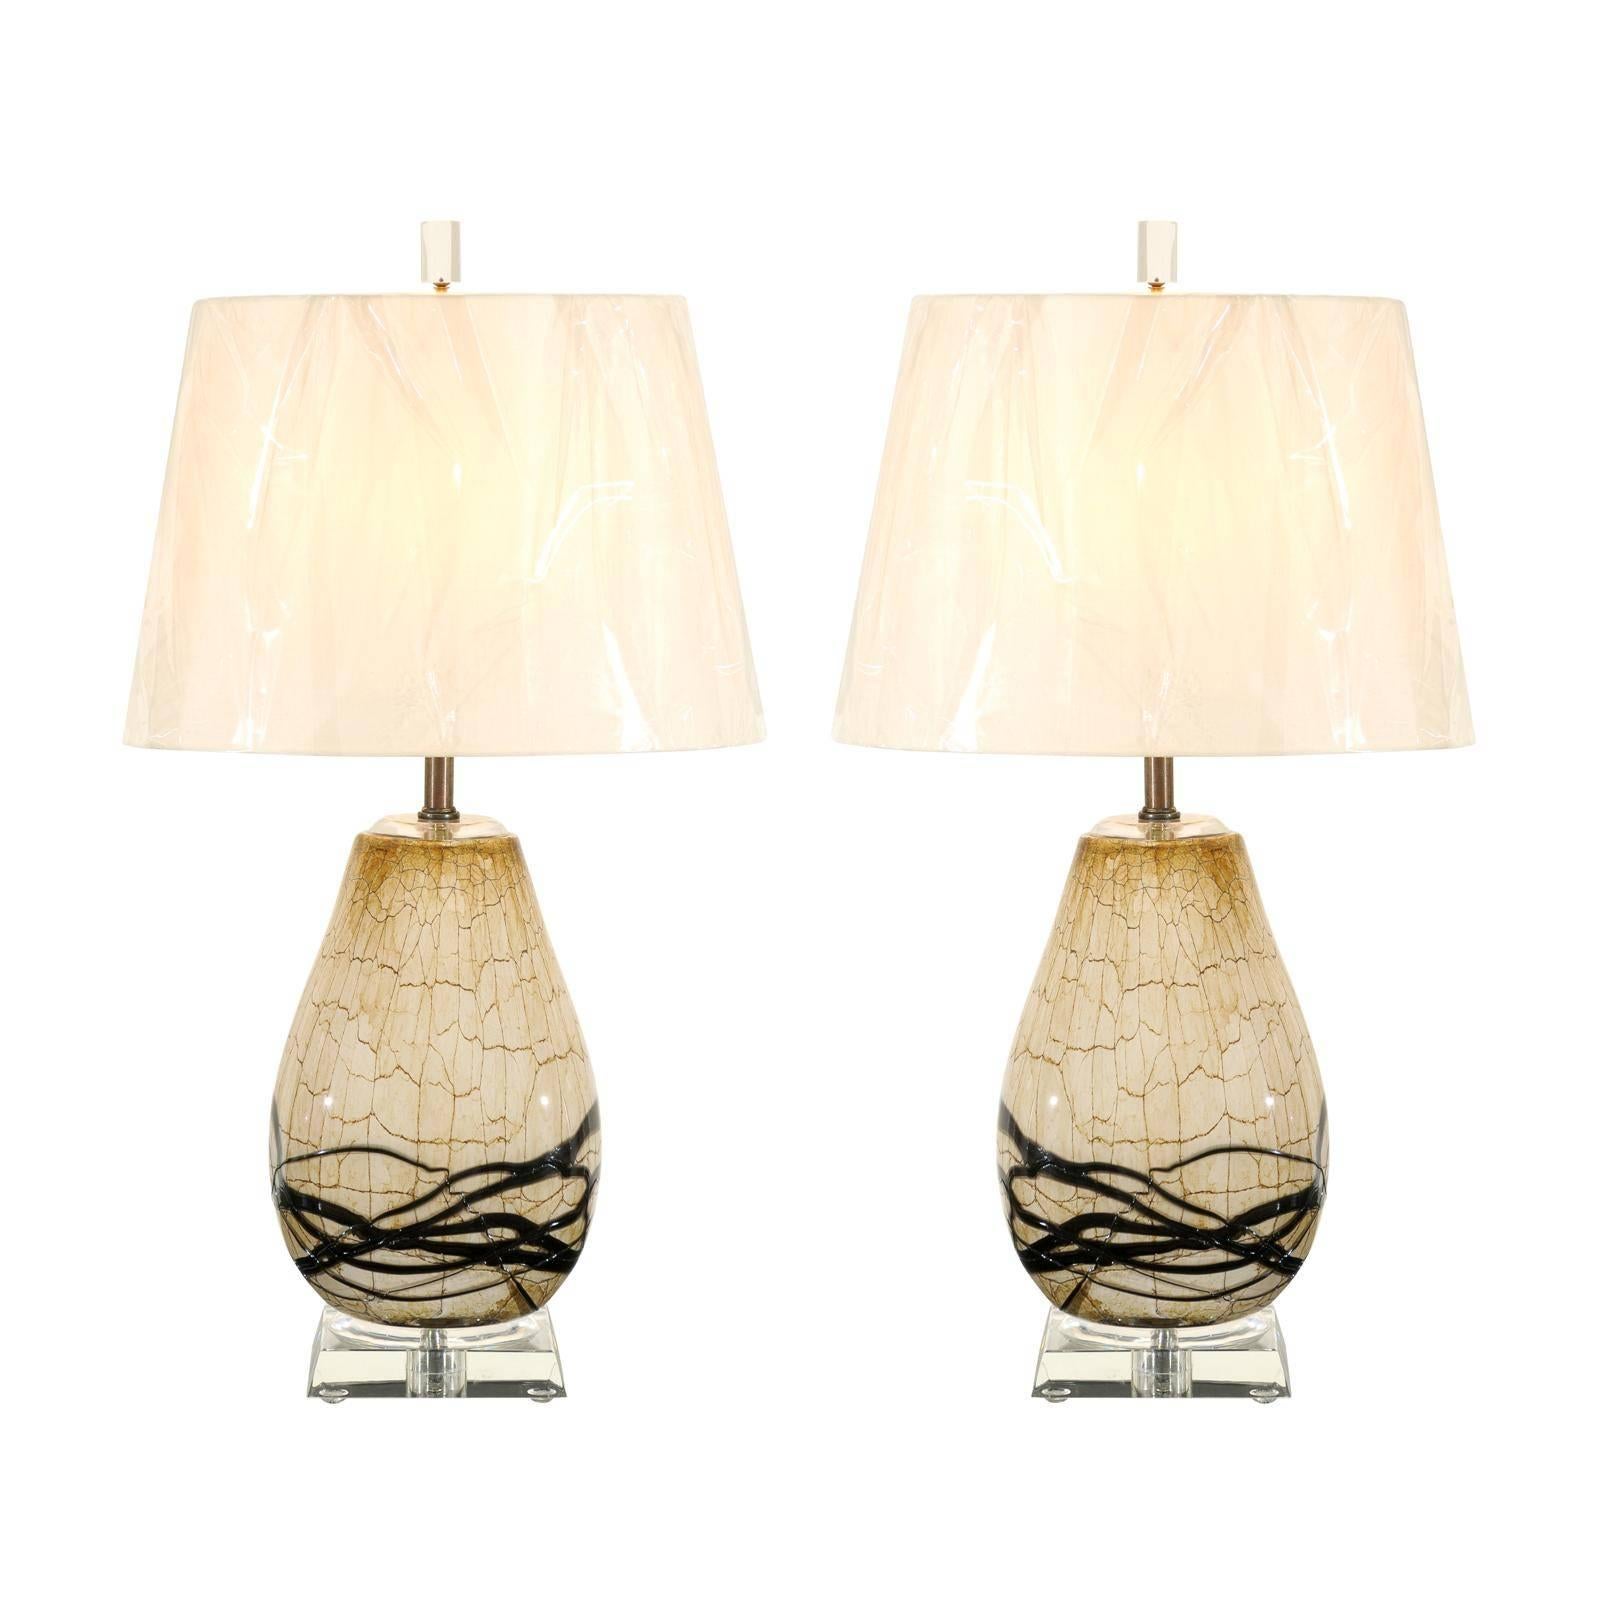 Gorgeous Pair of Blown Glass Lamps with Drip Glass Highlights